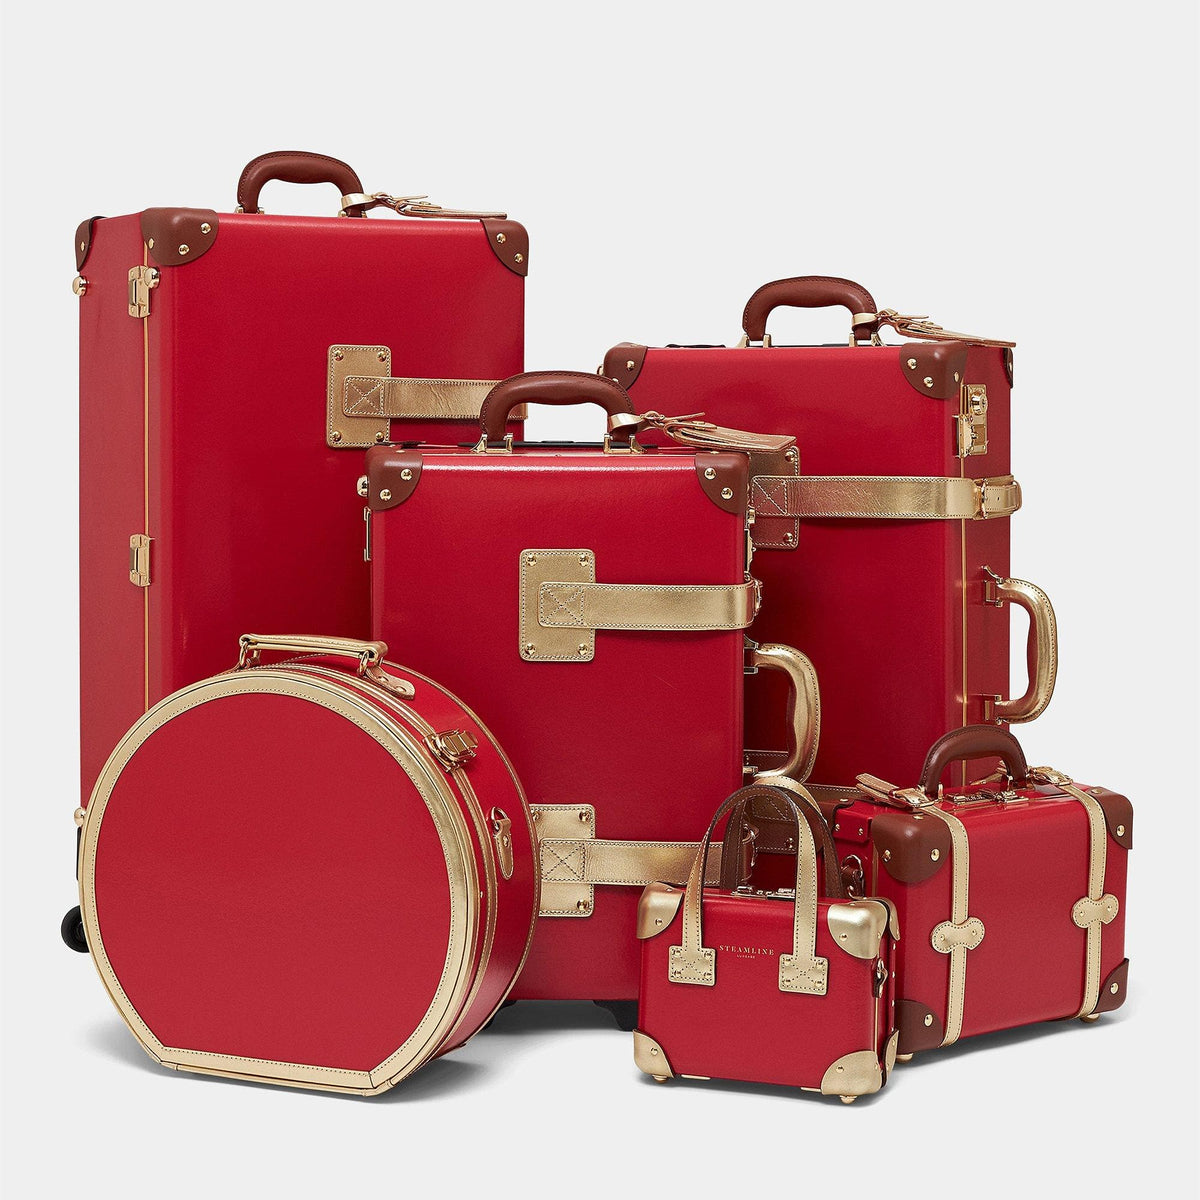 The Soprano - Red Hatbox Large Hatbox Large Steamline Luggage 